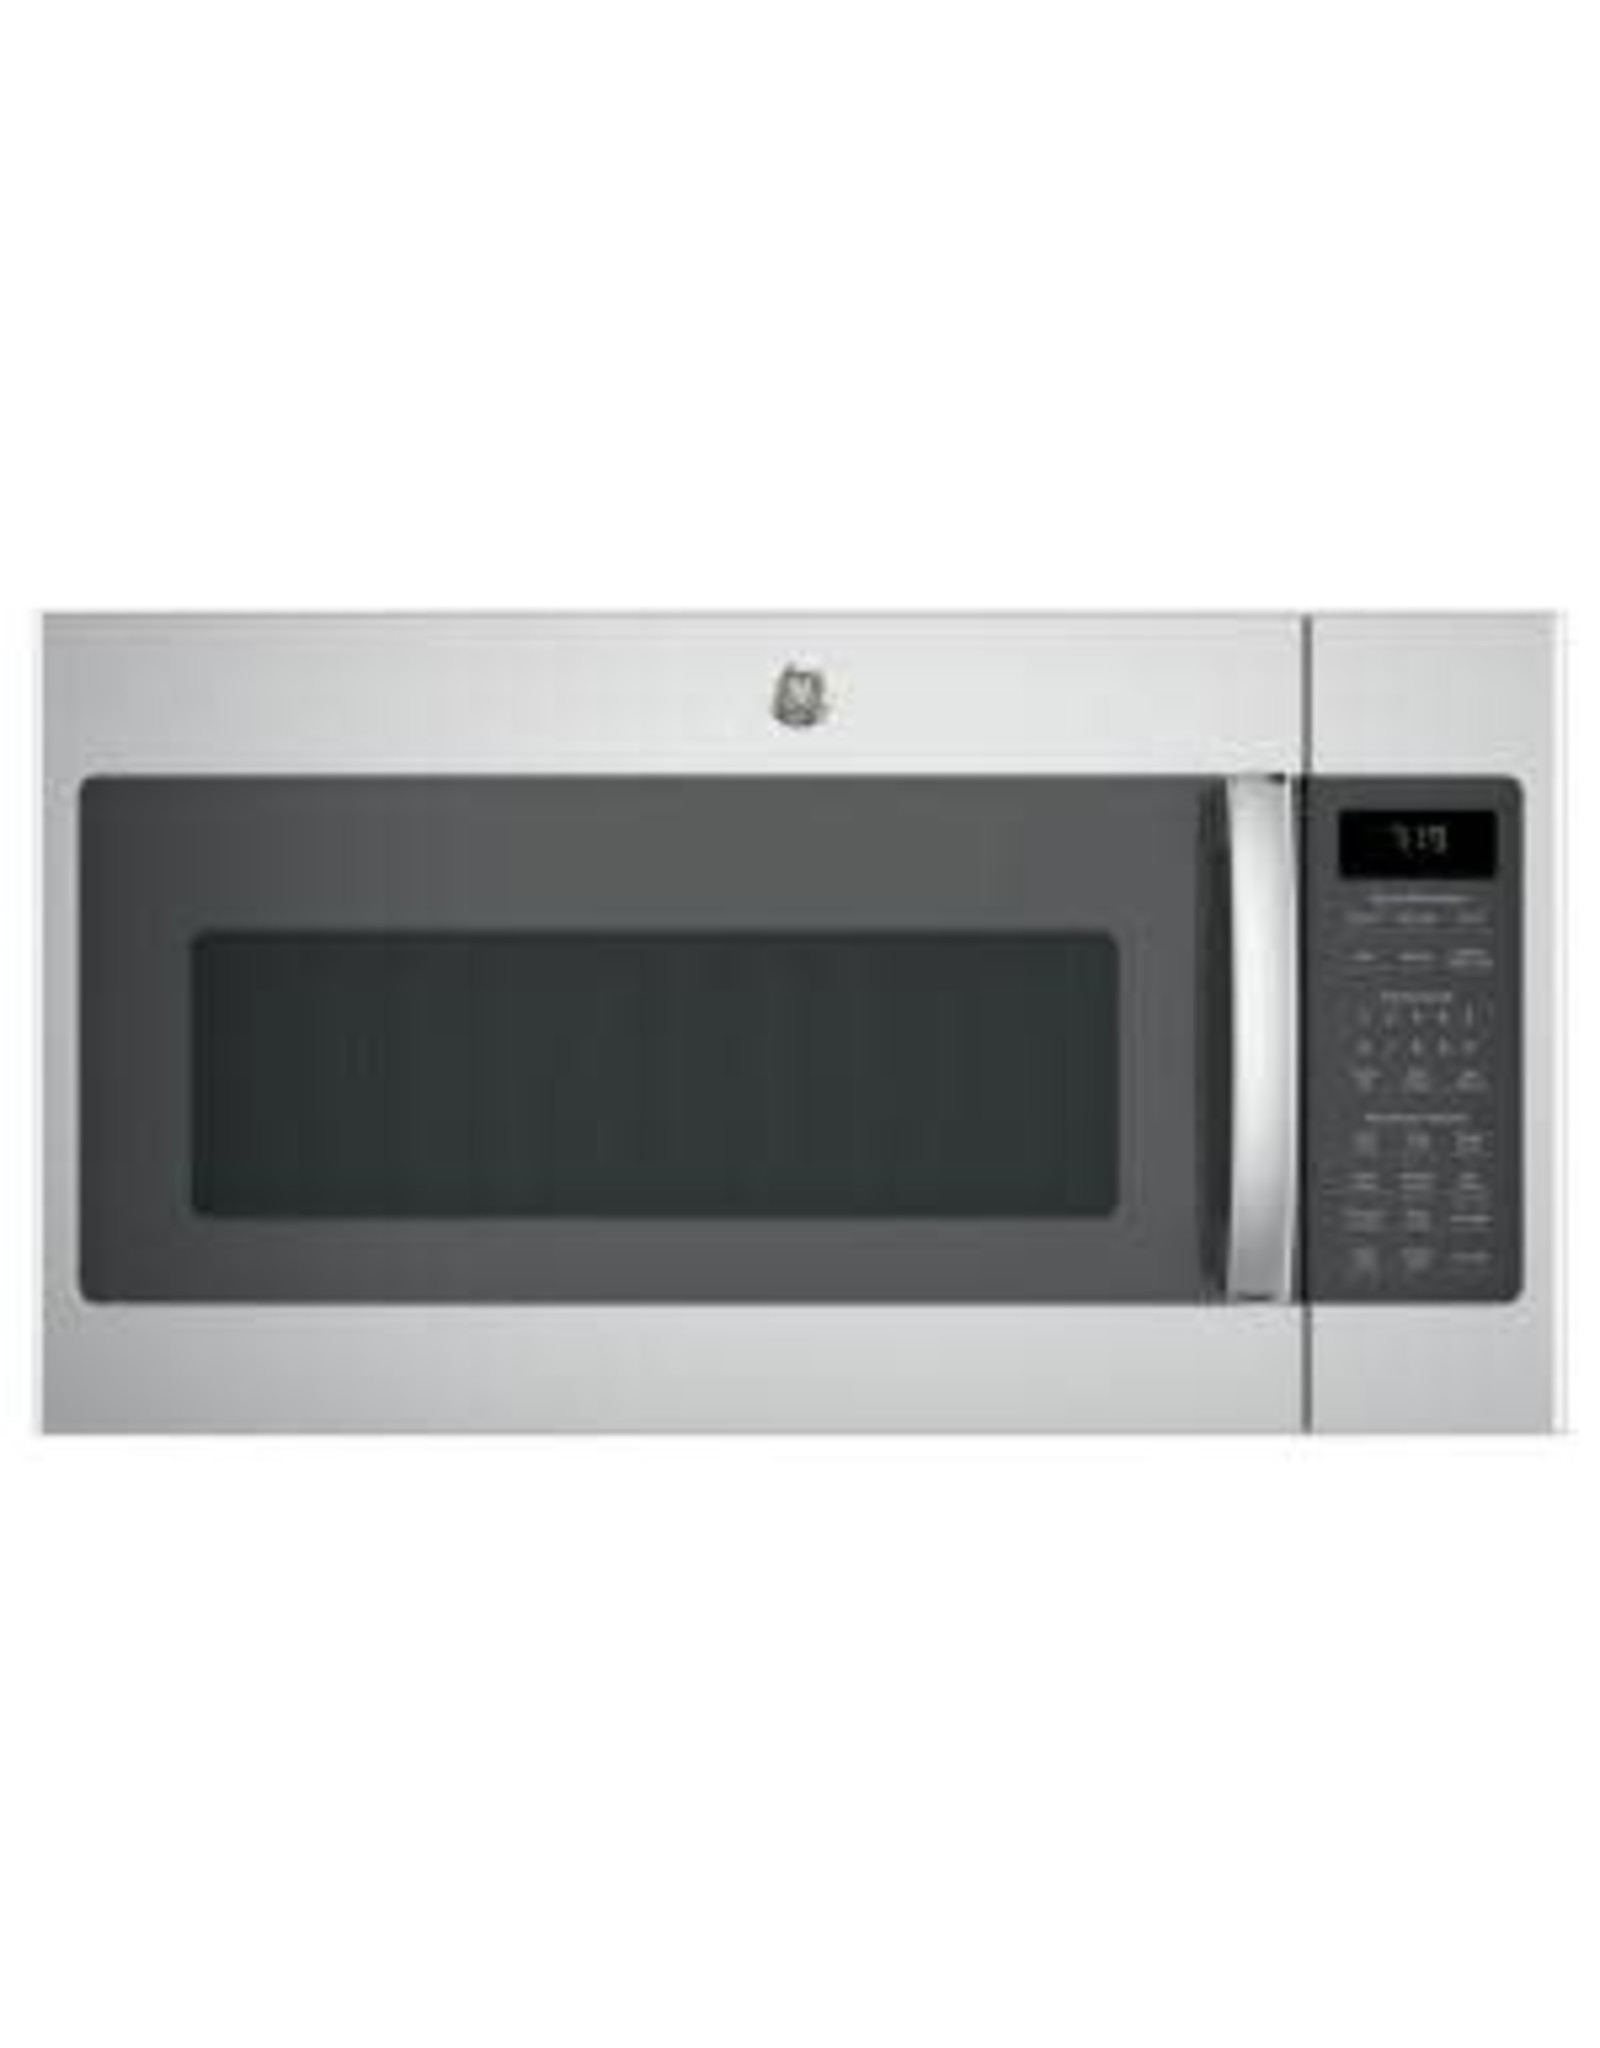 JVM7195SKSS 1.9 cu. ft. Over the Range Microwave in Stainless Steel with Sensor Cooking